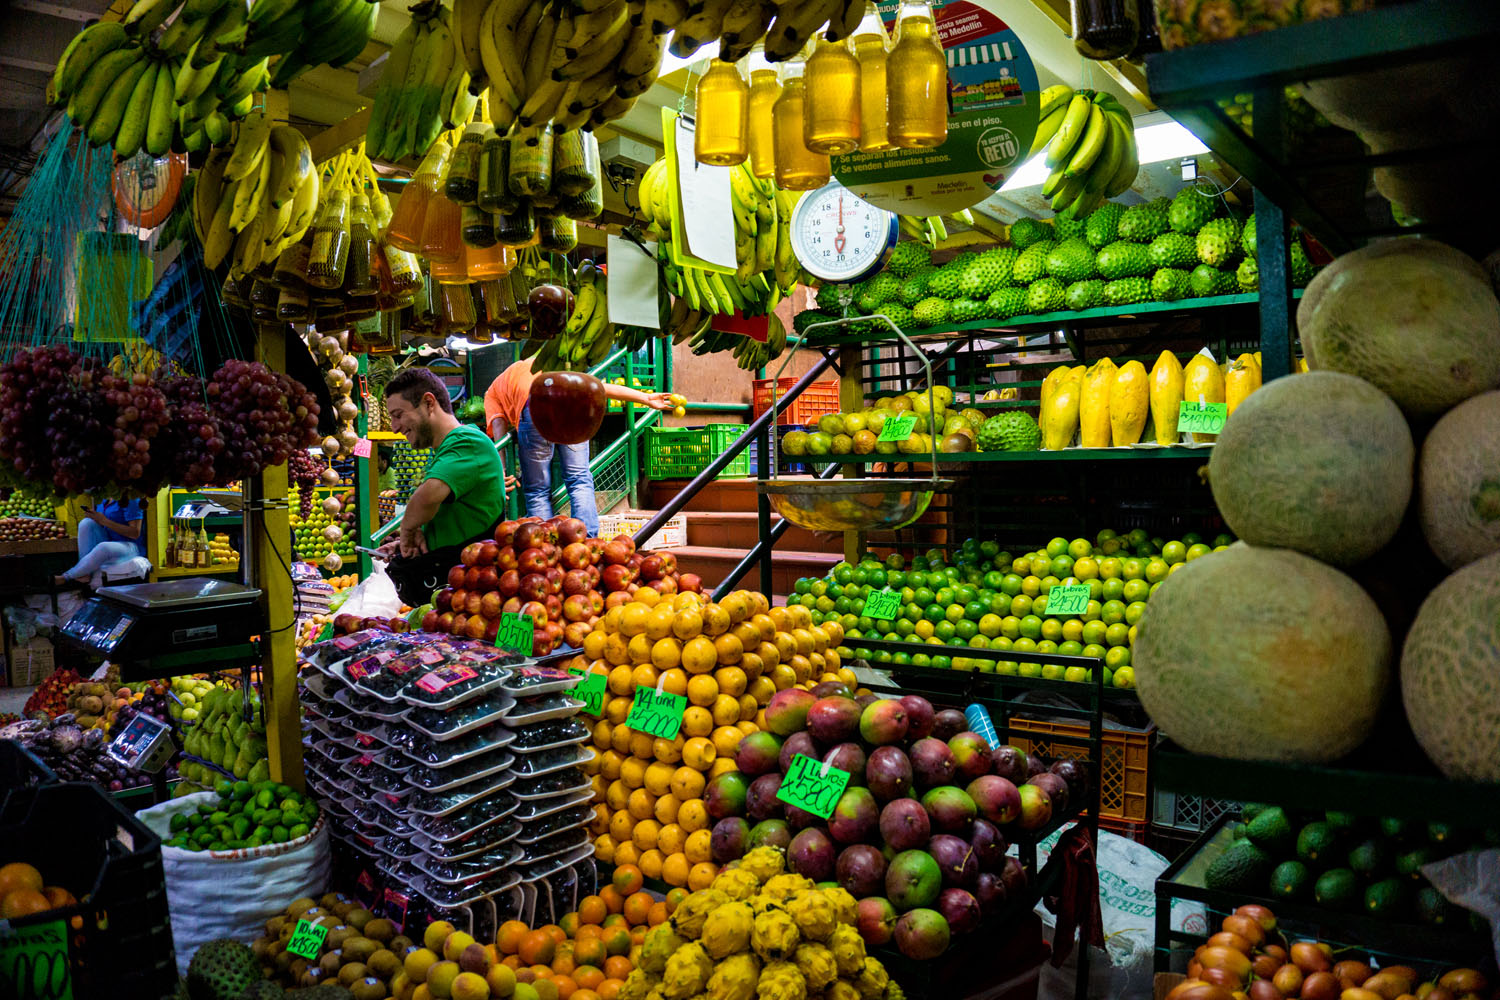 One of many fruit markets in Colombia.